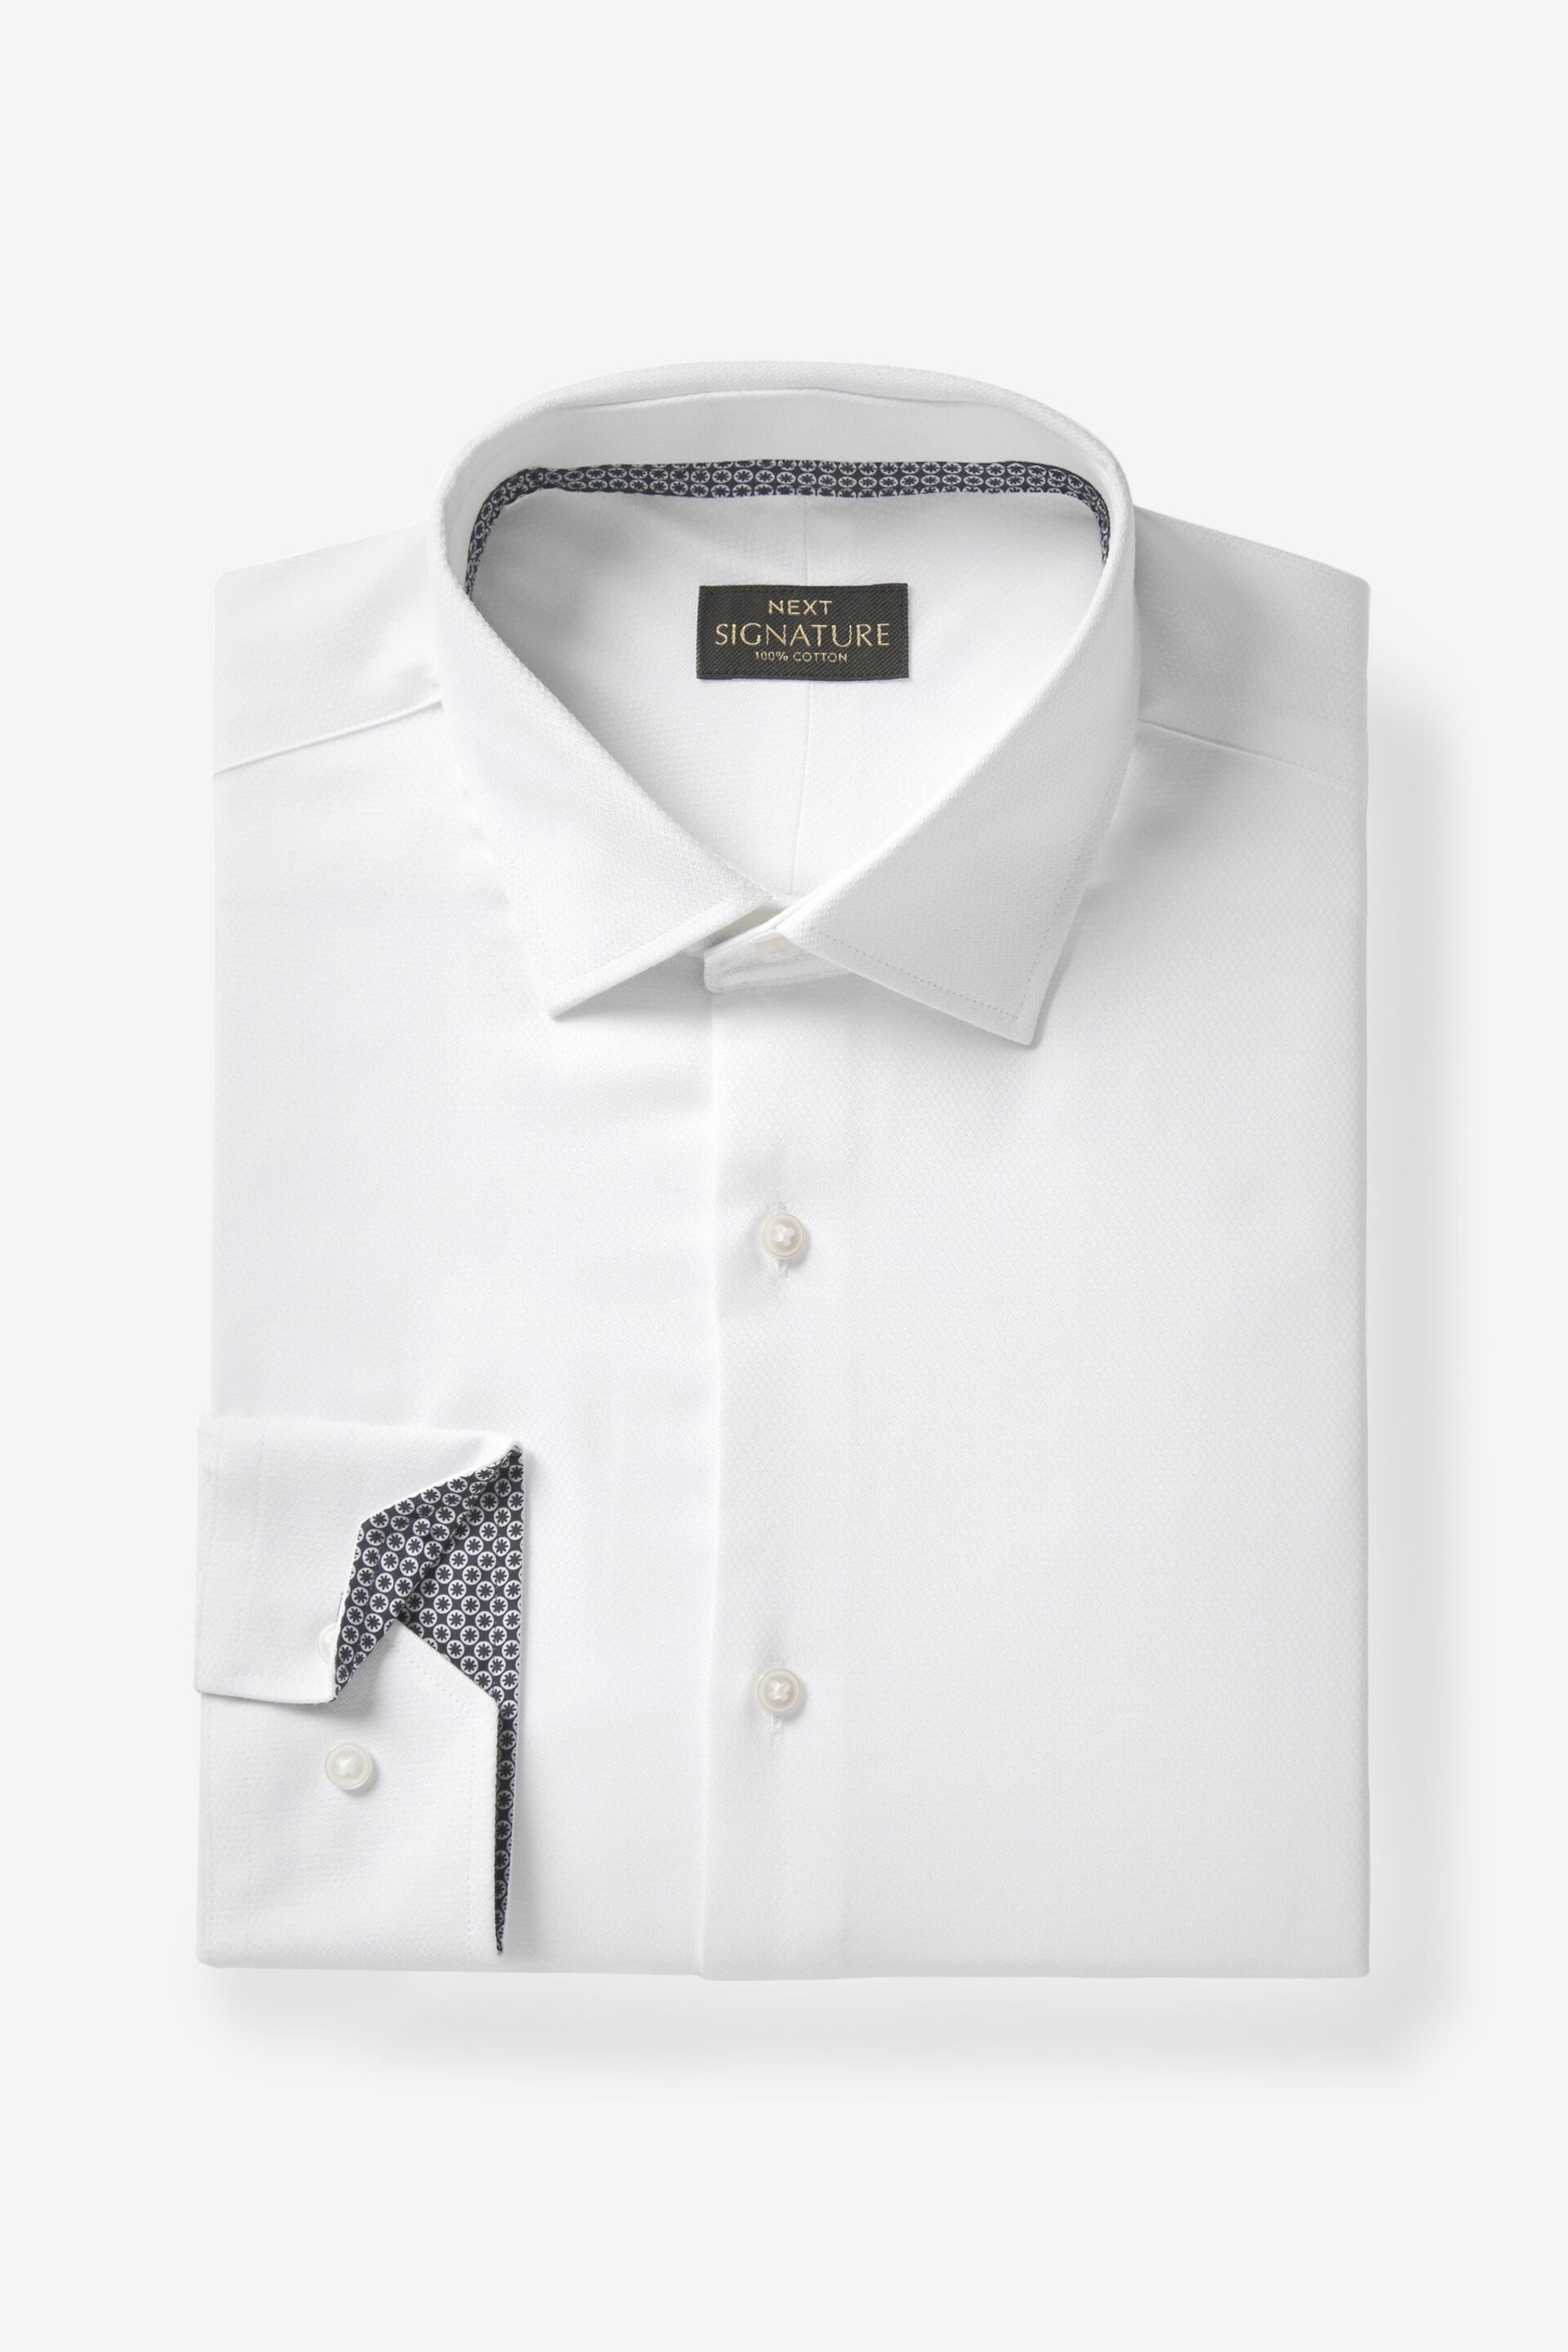 White Regular Fit Signature Textured Single Cuff Shirt With Trim Detail - Image 6 of 8